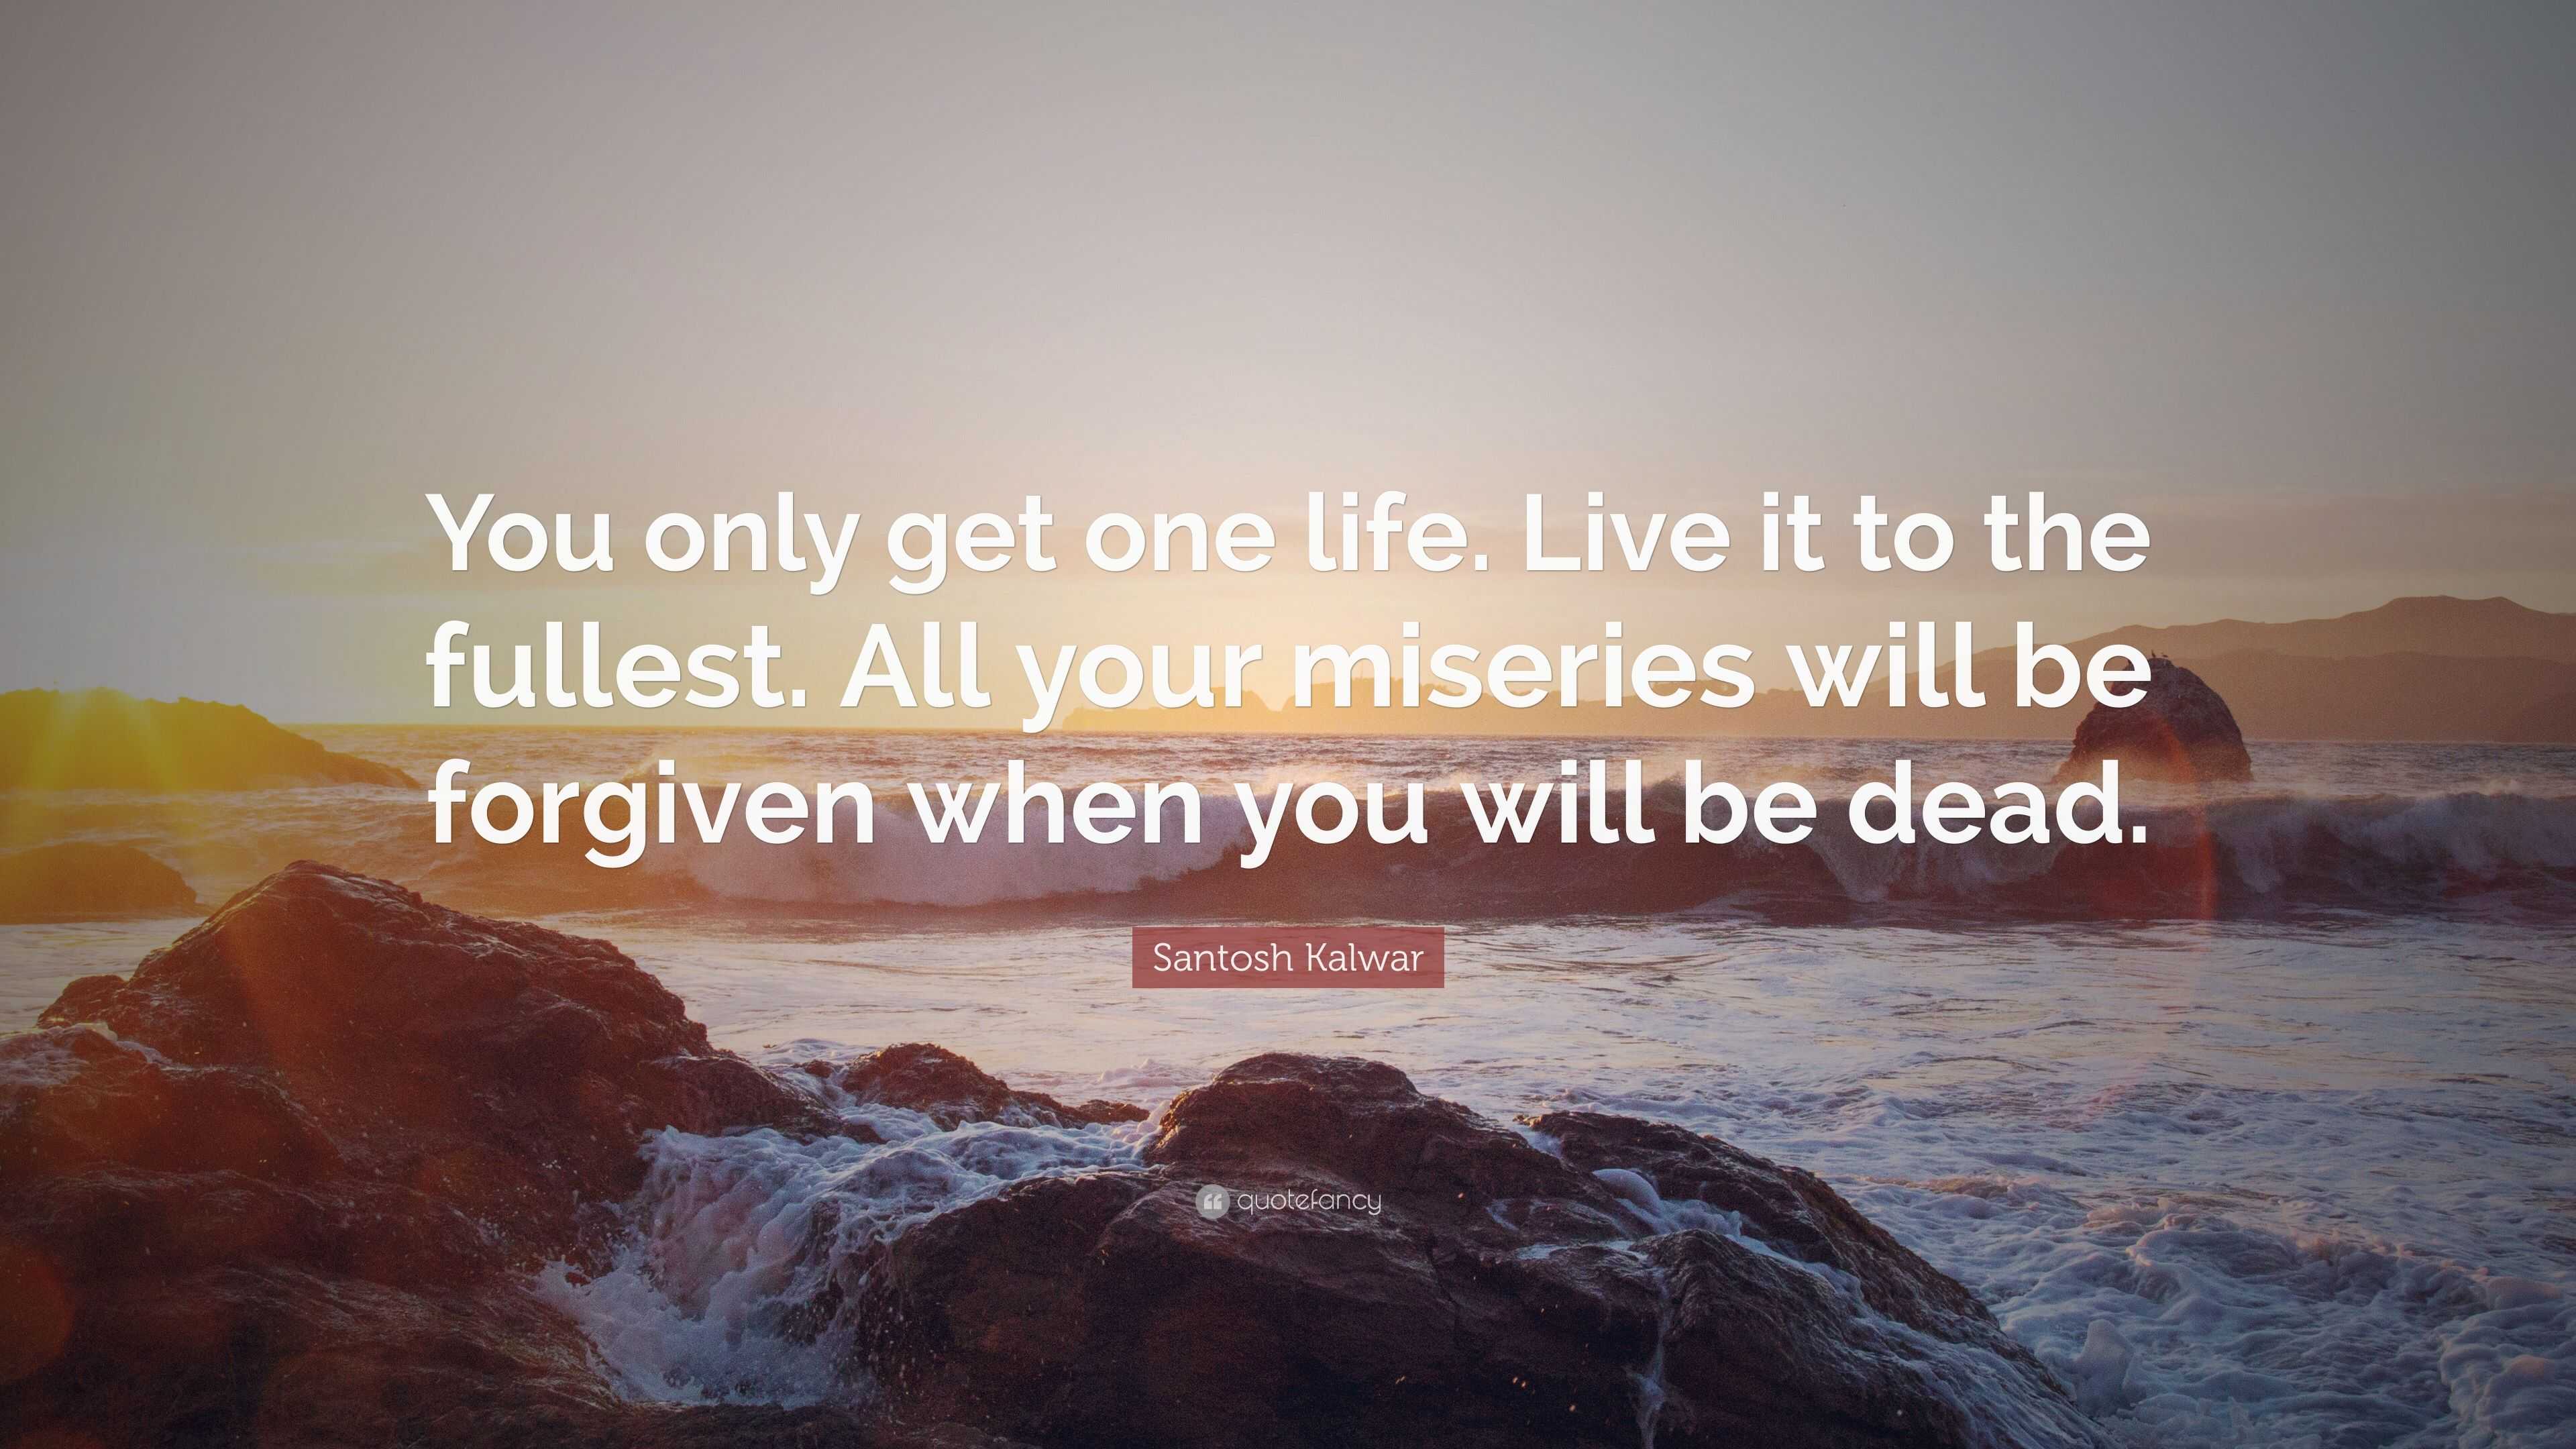 Santosh Kalwar Quote “You only one life Live it to the fullest